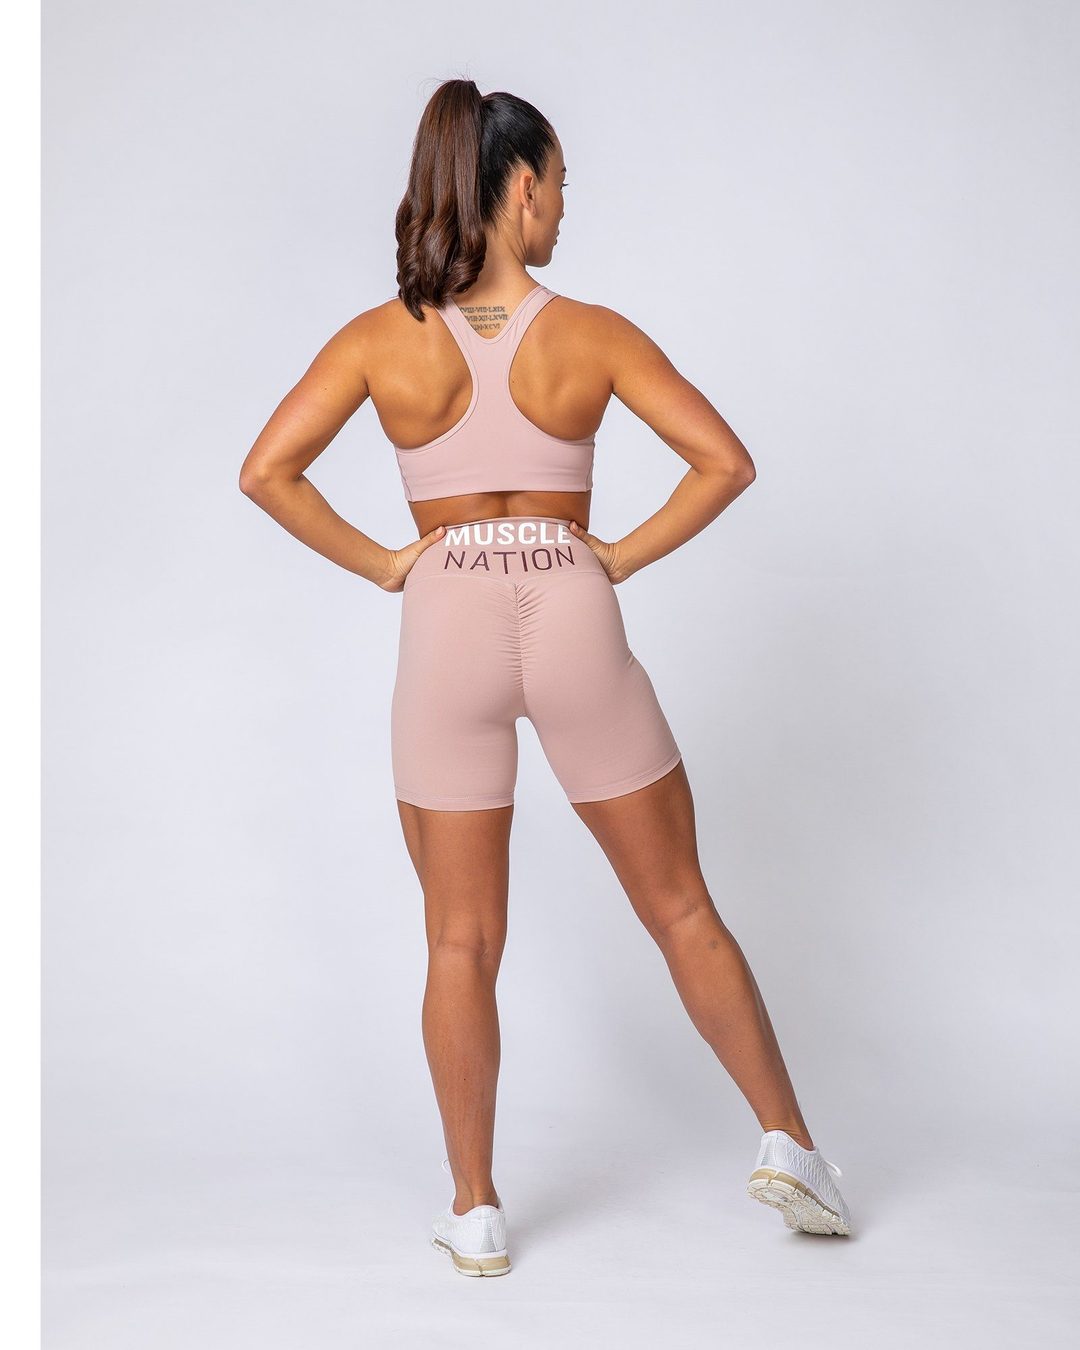 musclenation Prize Fighter Bike Shorts - Fawn W/ White &amp; Wine